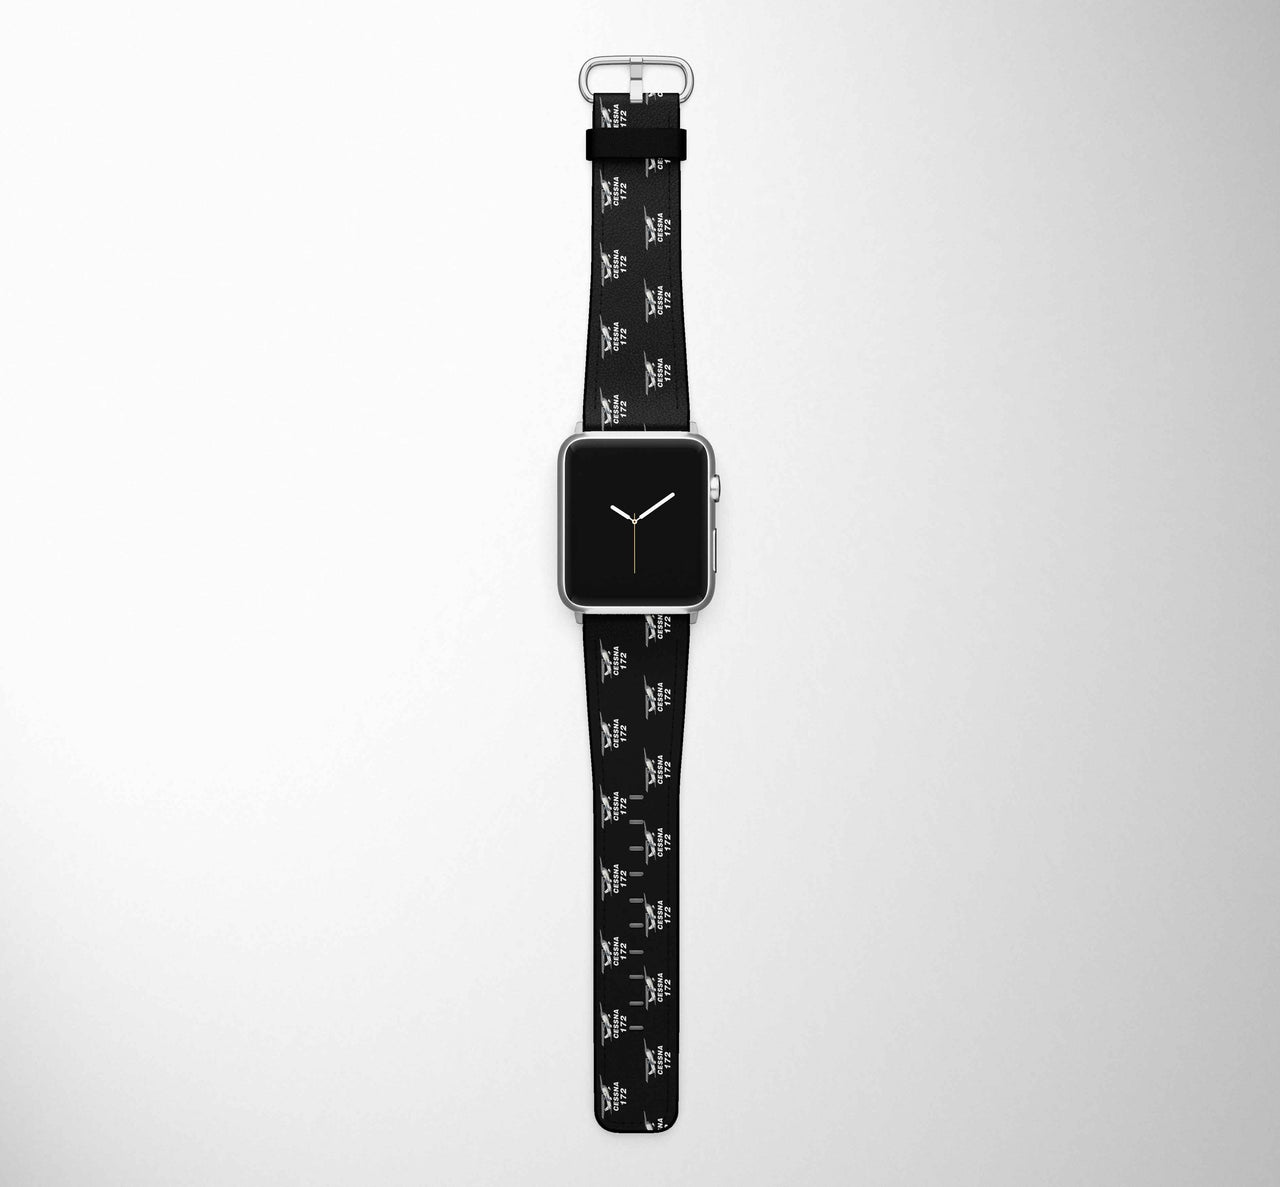 The Cessna 172 Designed Leather Apple Watch Straps